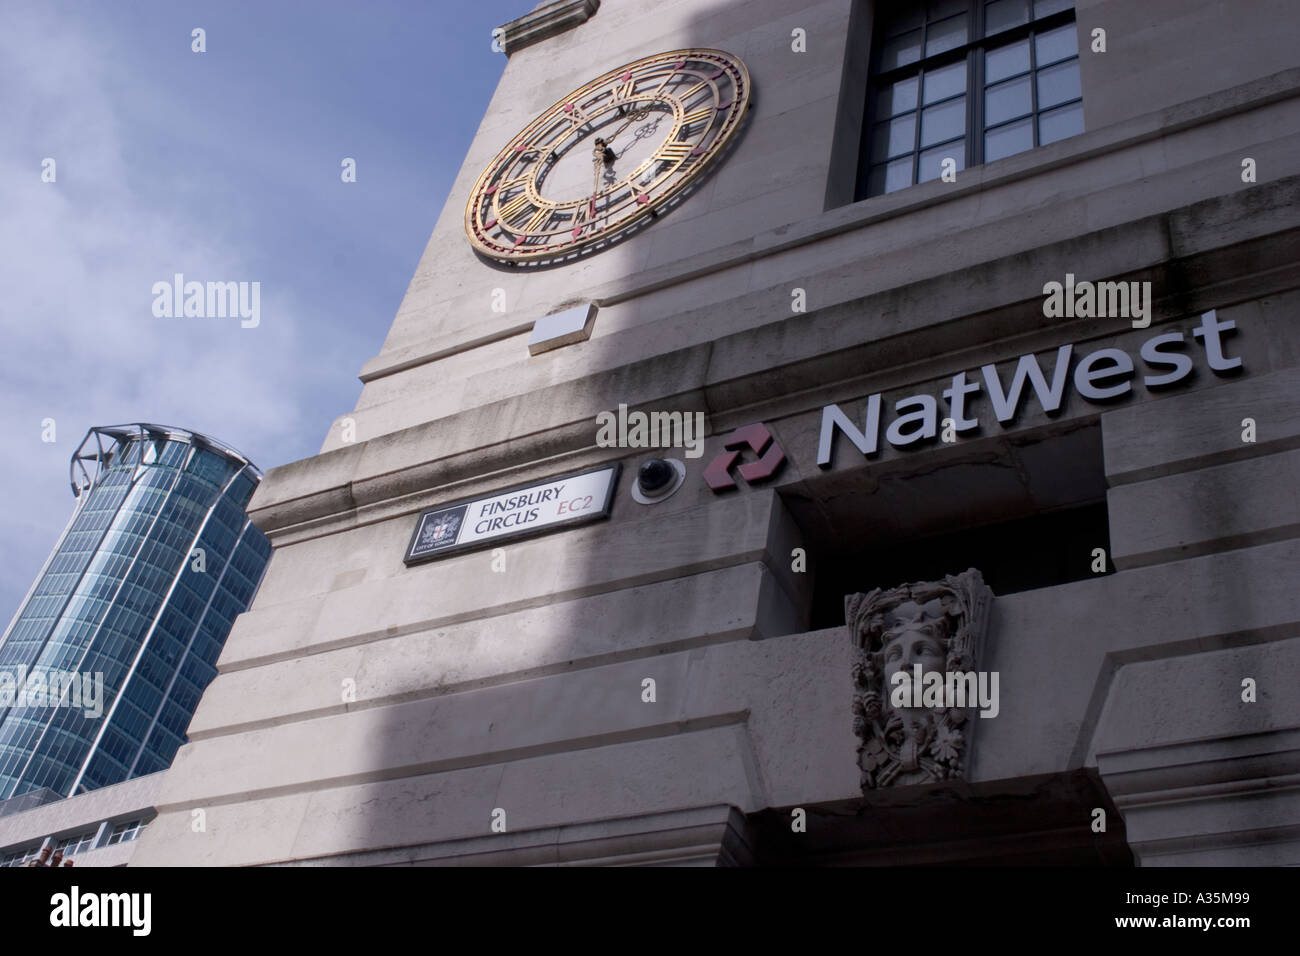 Natwest national westminster bank high street bank branch Moorgate city of London with clock and city view Stock Photo